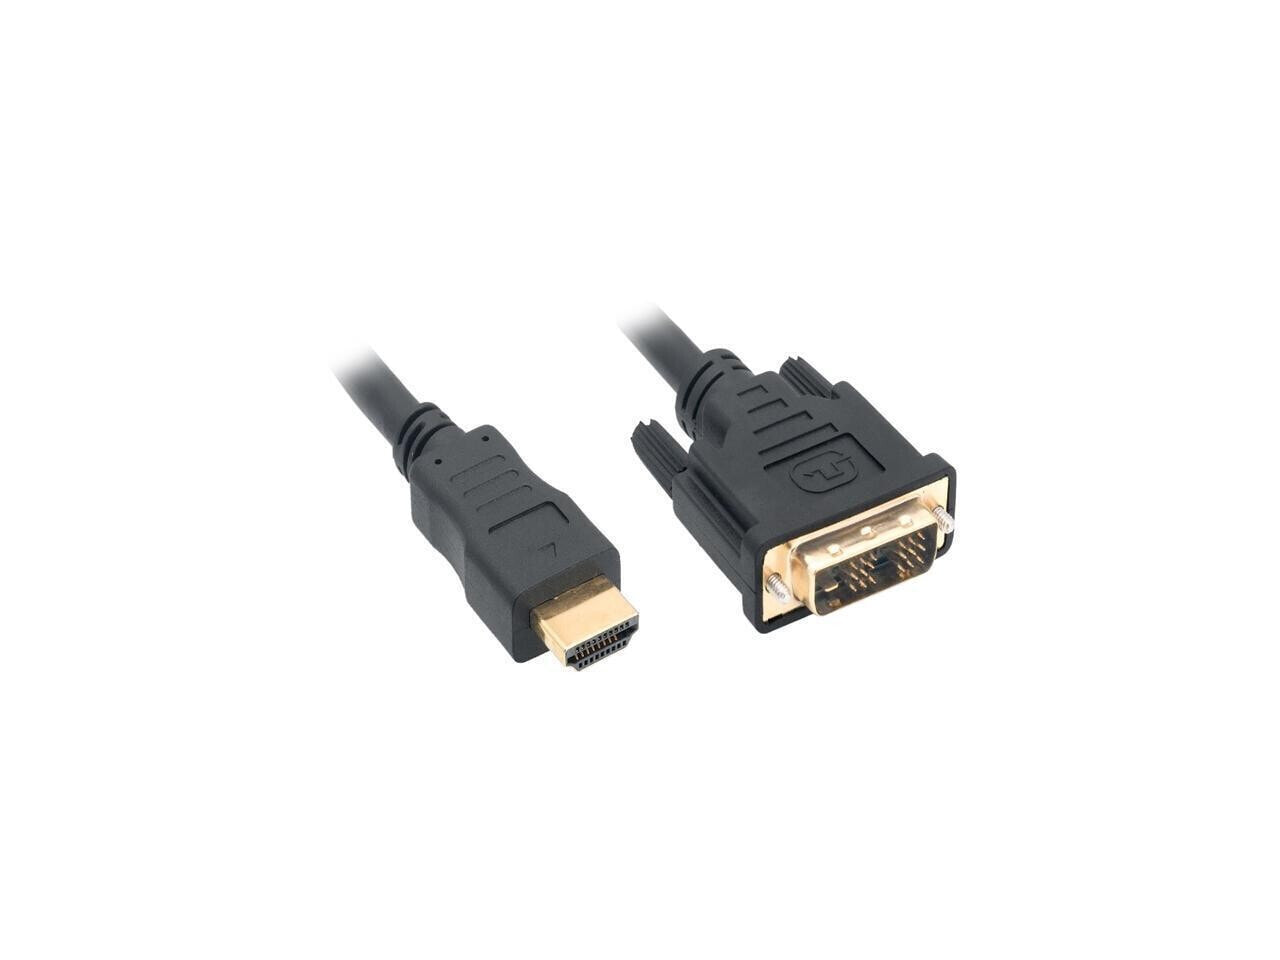 Nippon Labs DVI-2-HDMI-2P 6 ft. HDMI Male to DVI-D Adapter Cable with Gold-plate